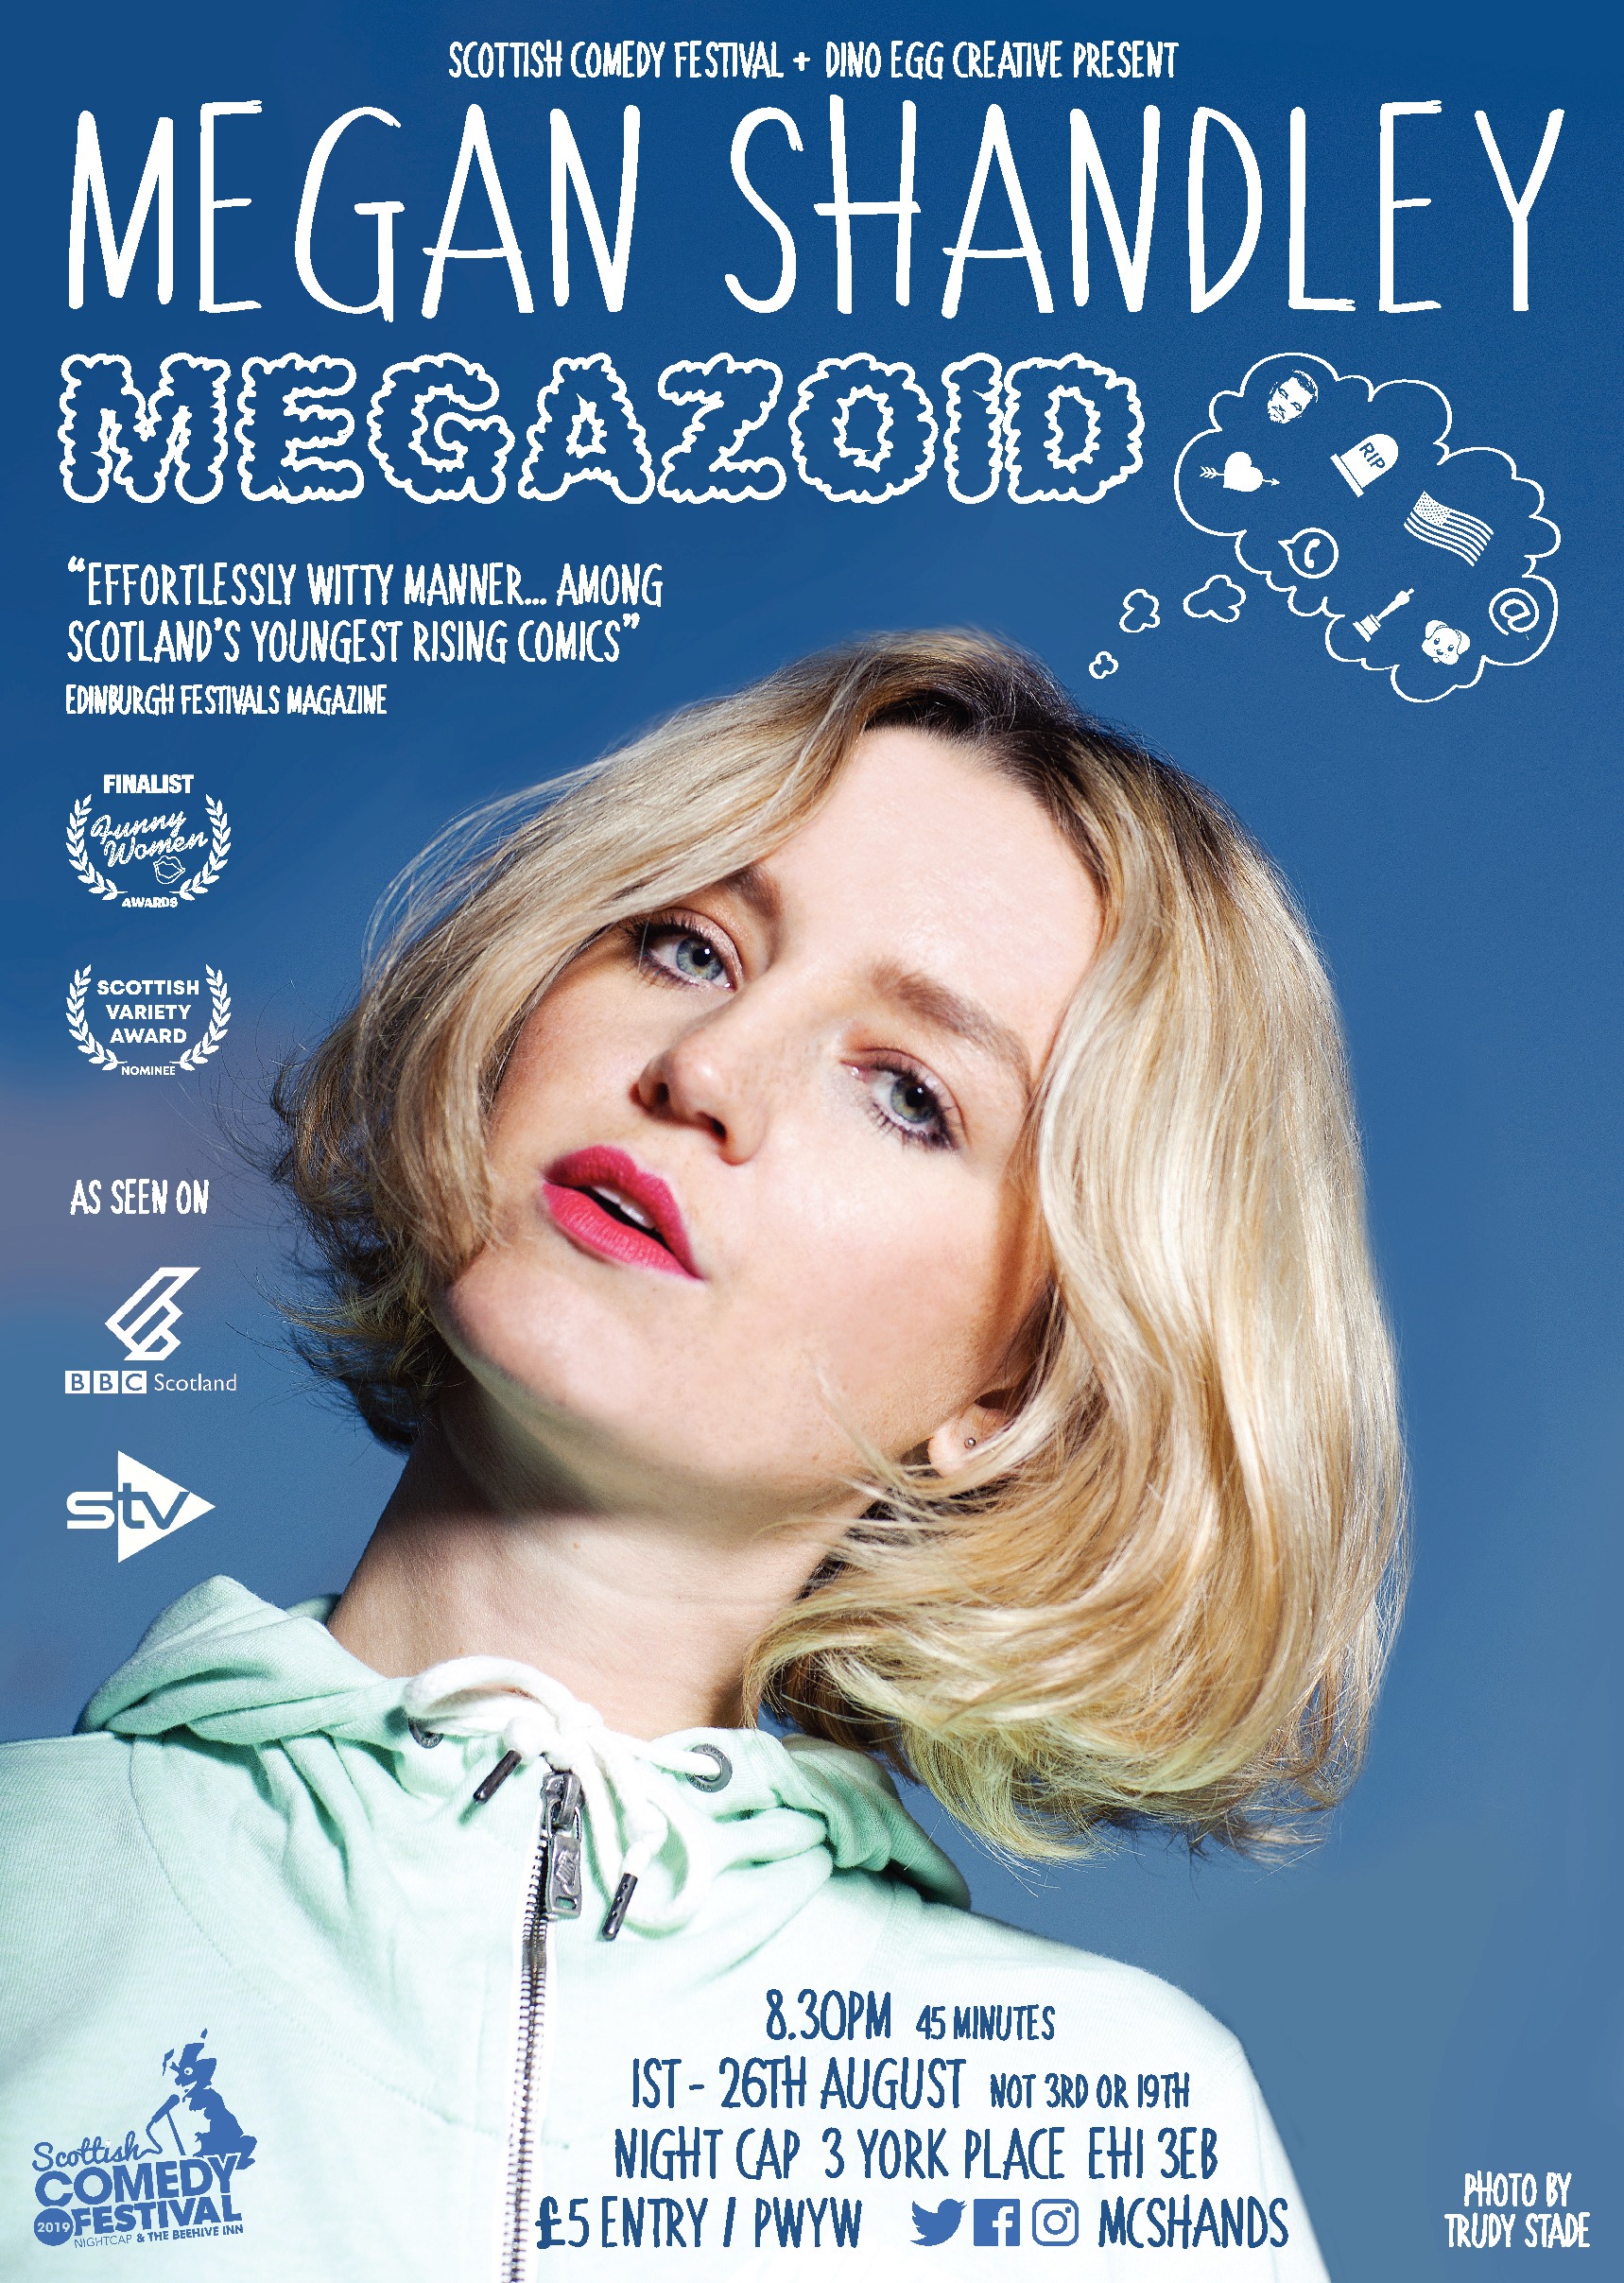 The poster for Megazoid